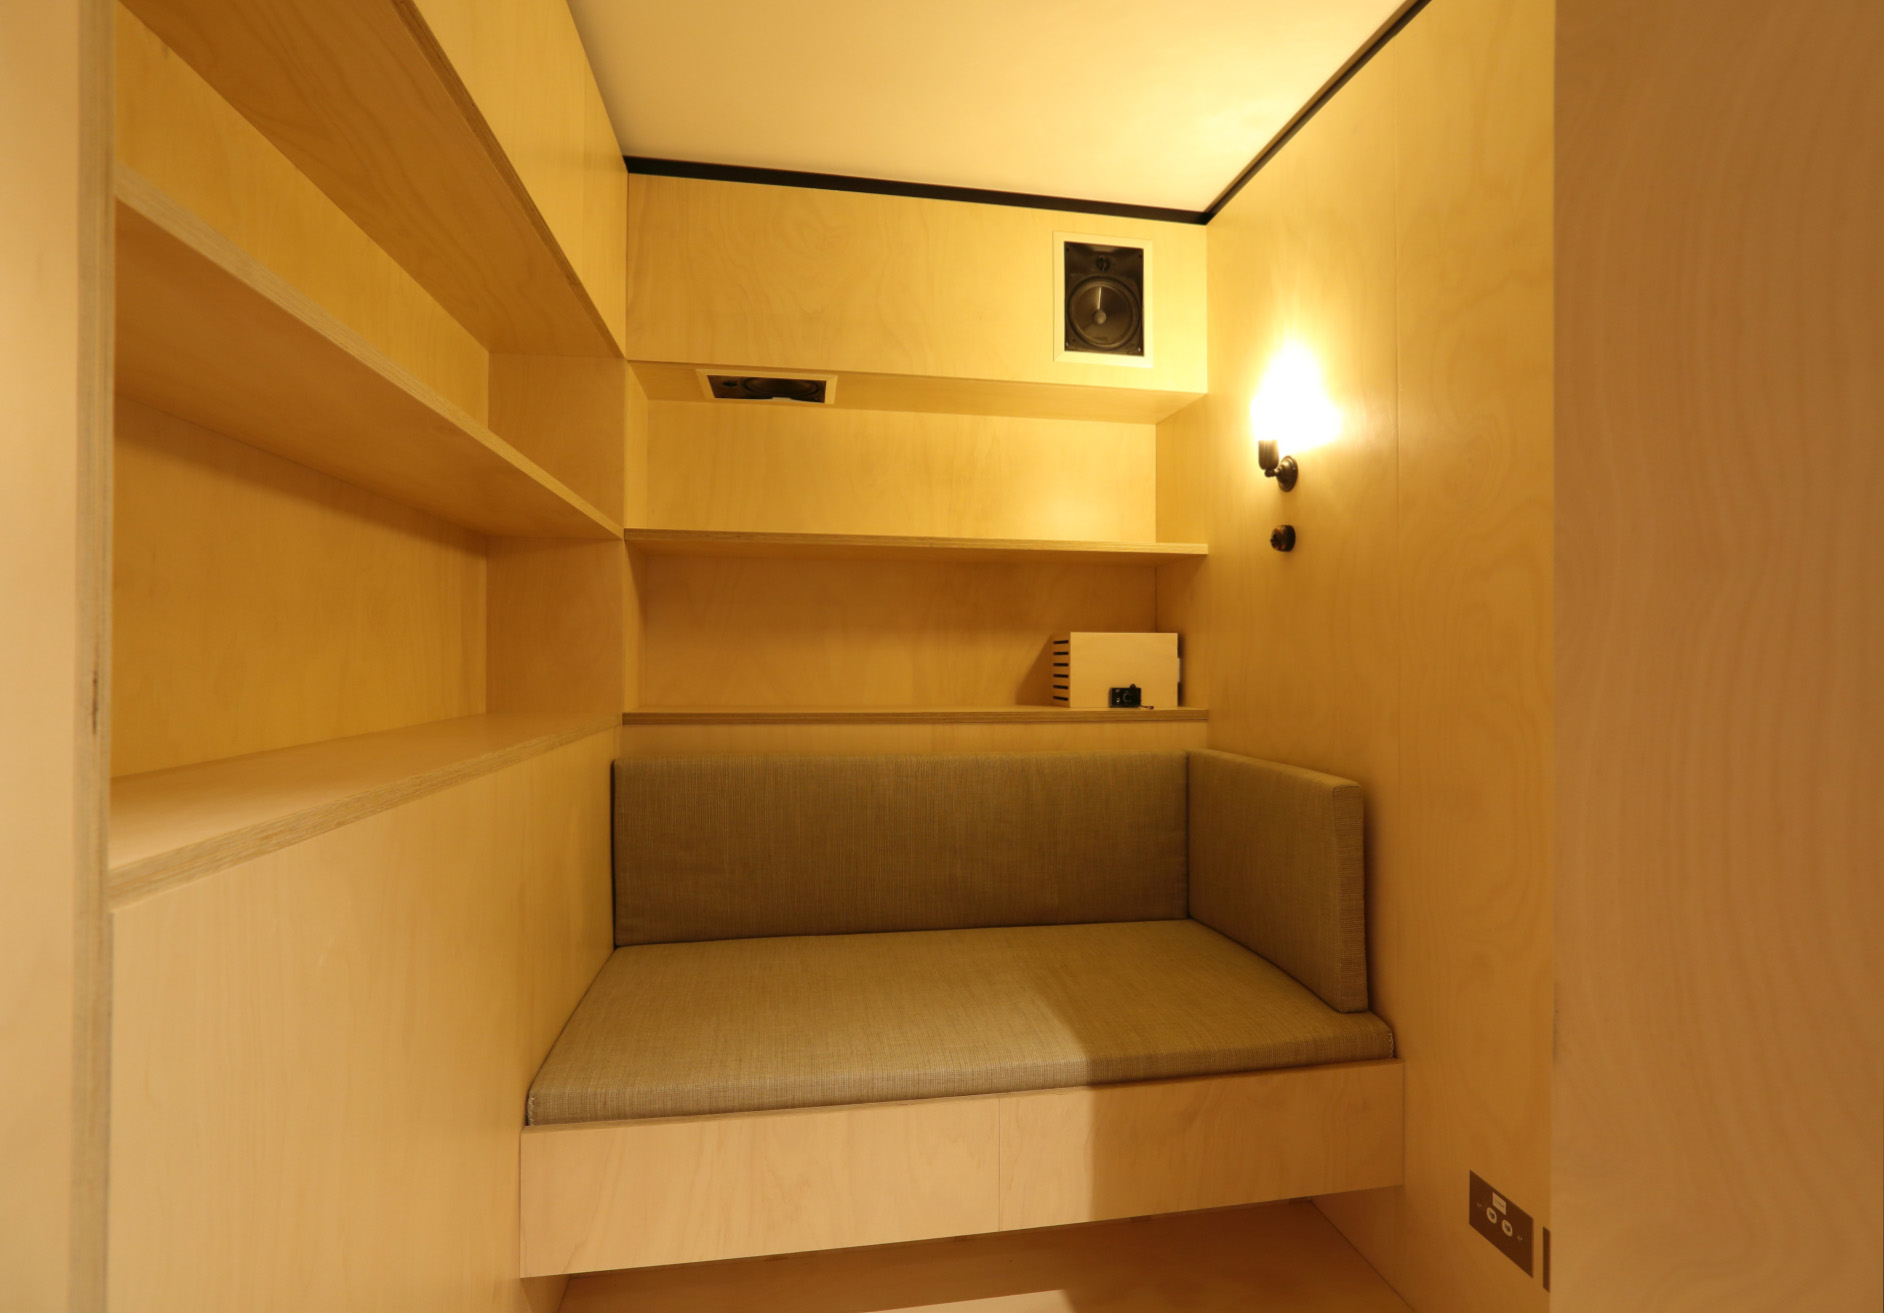 Our listening booths are available for quiet spots for contemplation or thinking time.